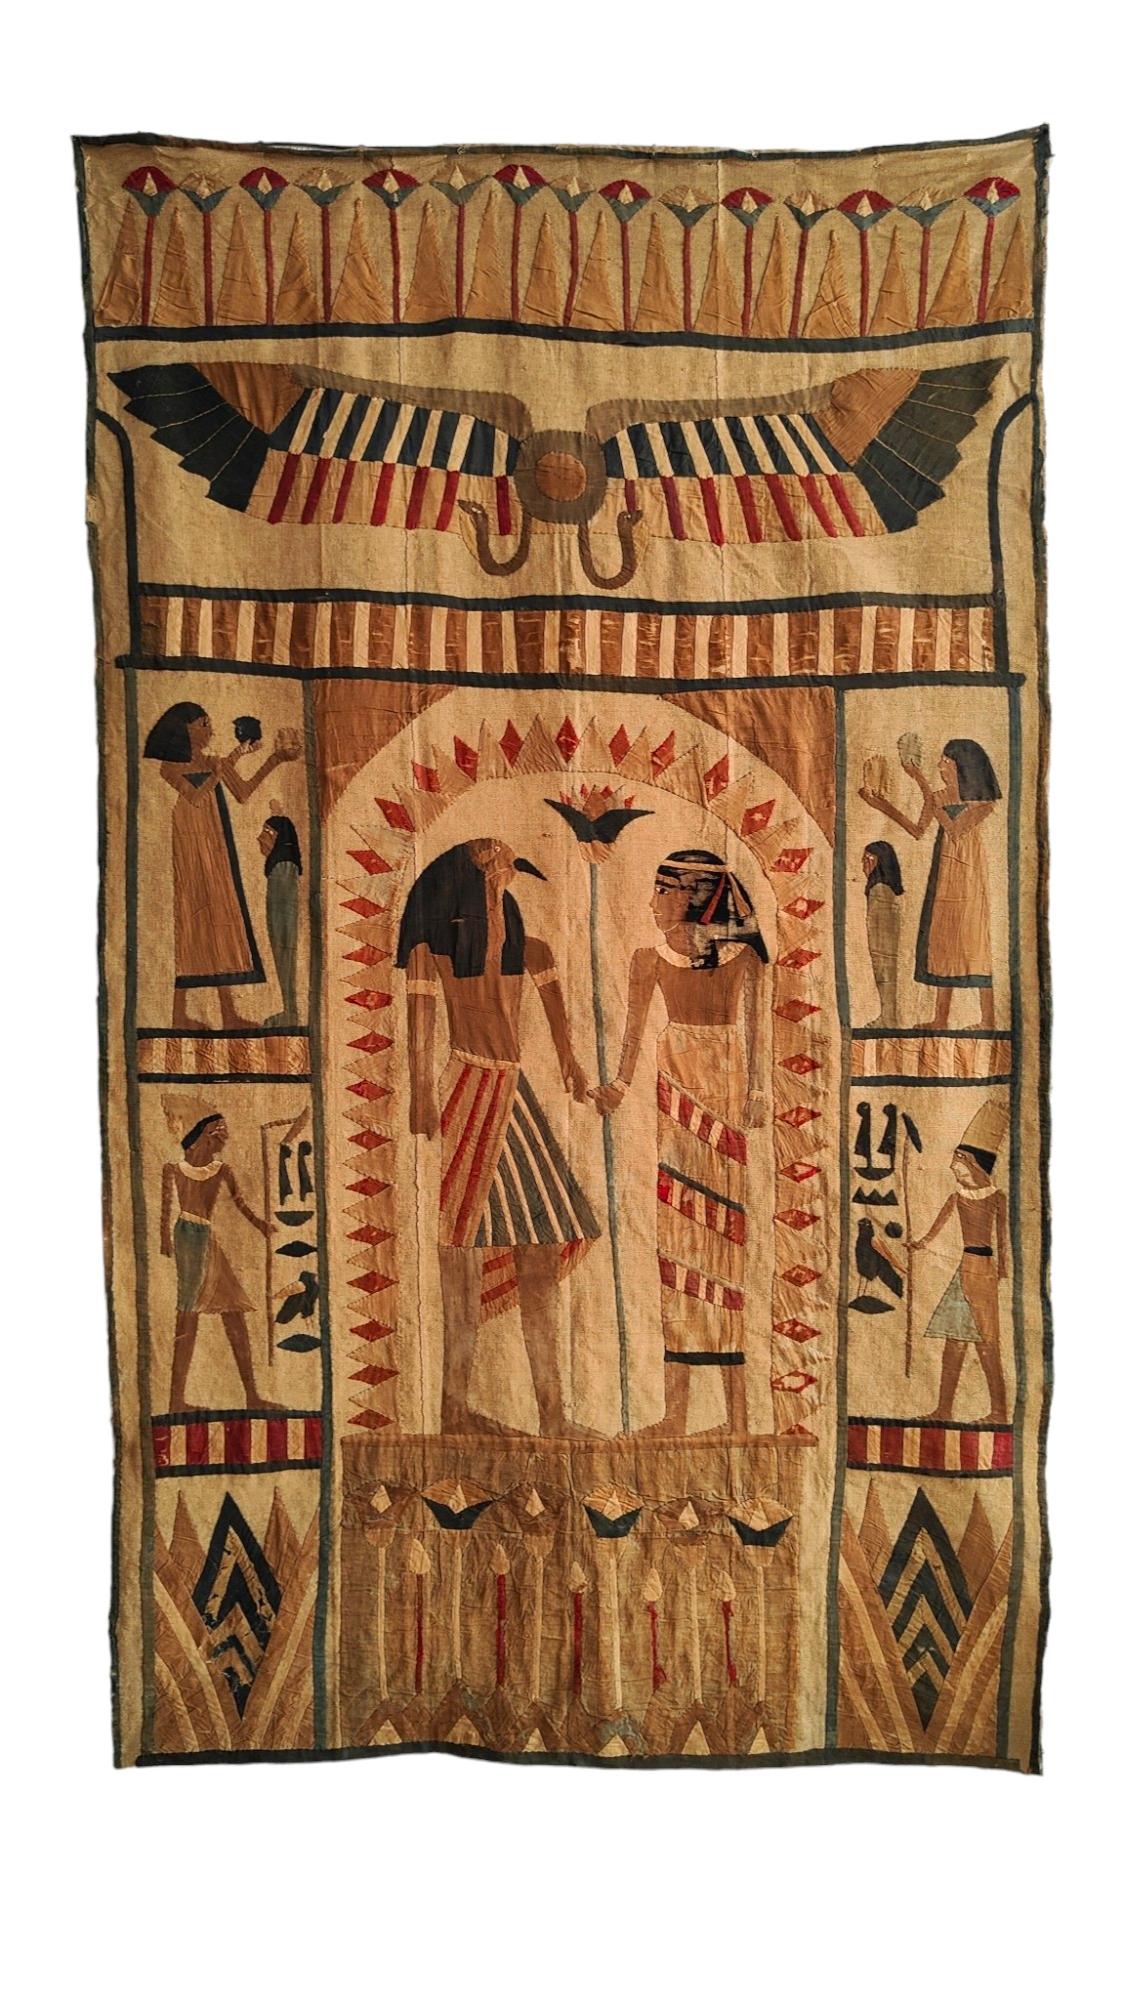 Old Egyptian Style Tapestry 1920s
DECORATIVE TAPESTRY IN THE EGYPTIAN TASTE MADE IN FRANCE IN THE 20S WITH HAND-SEWN FABRIC. MEASUREMENTS: 230X137 CM